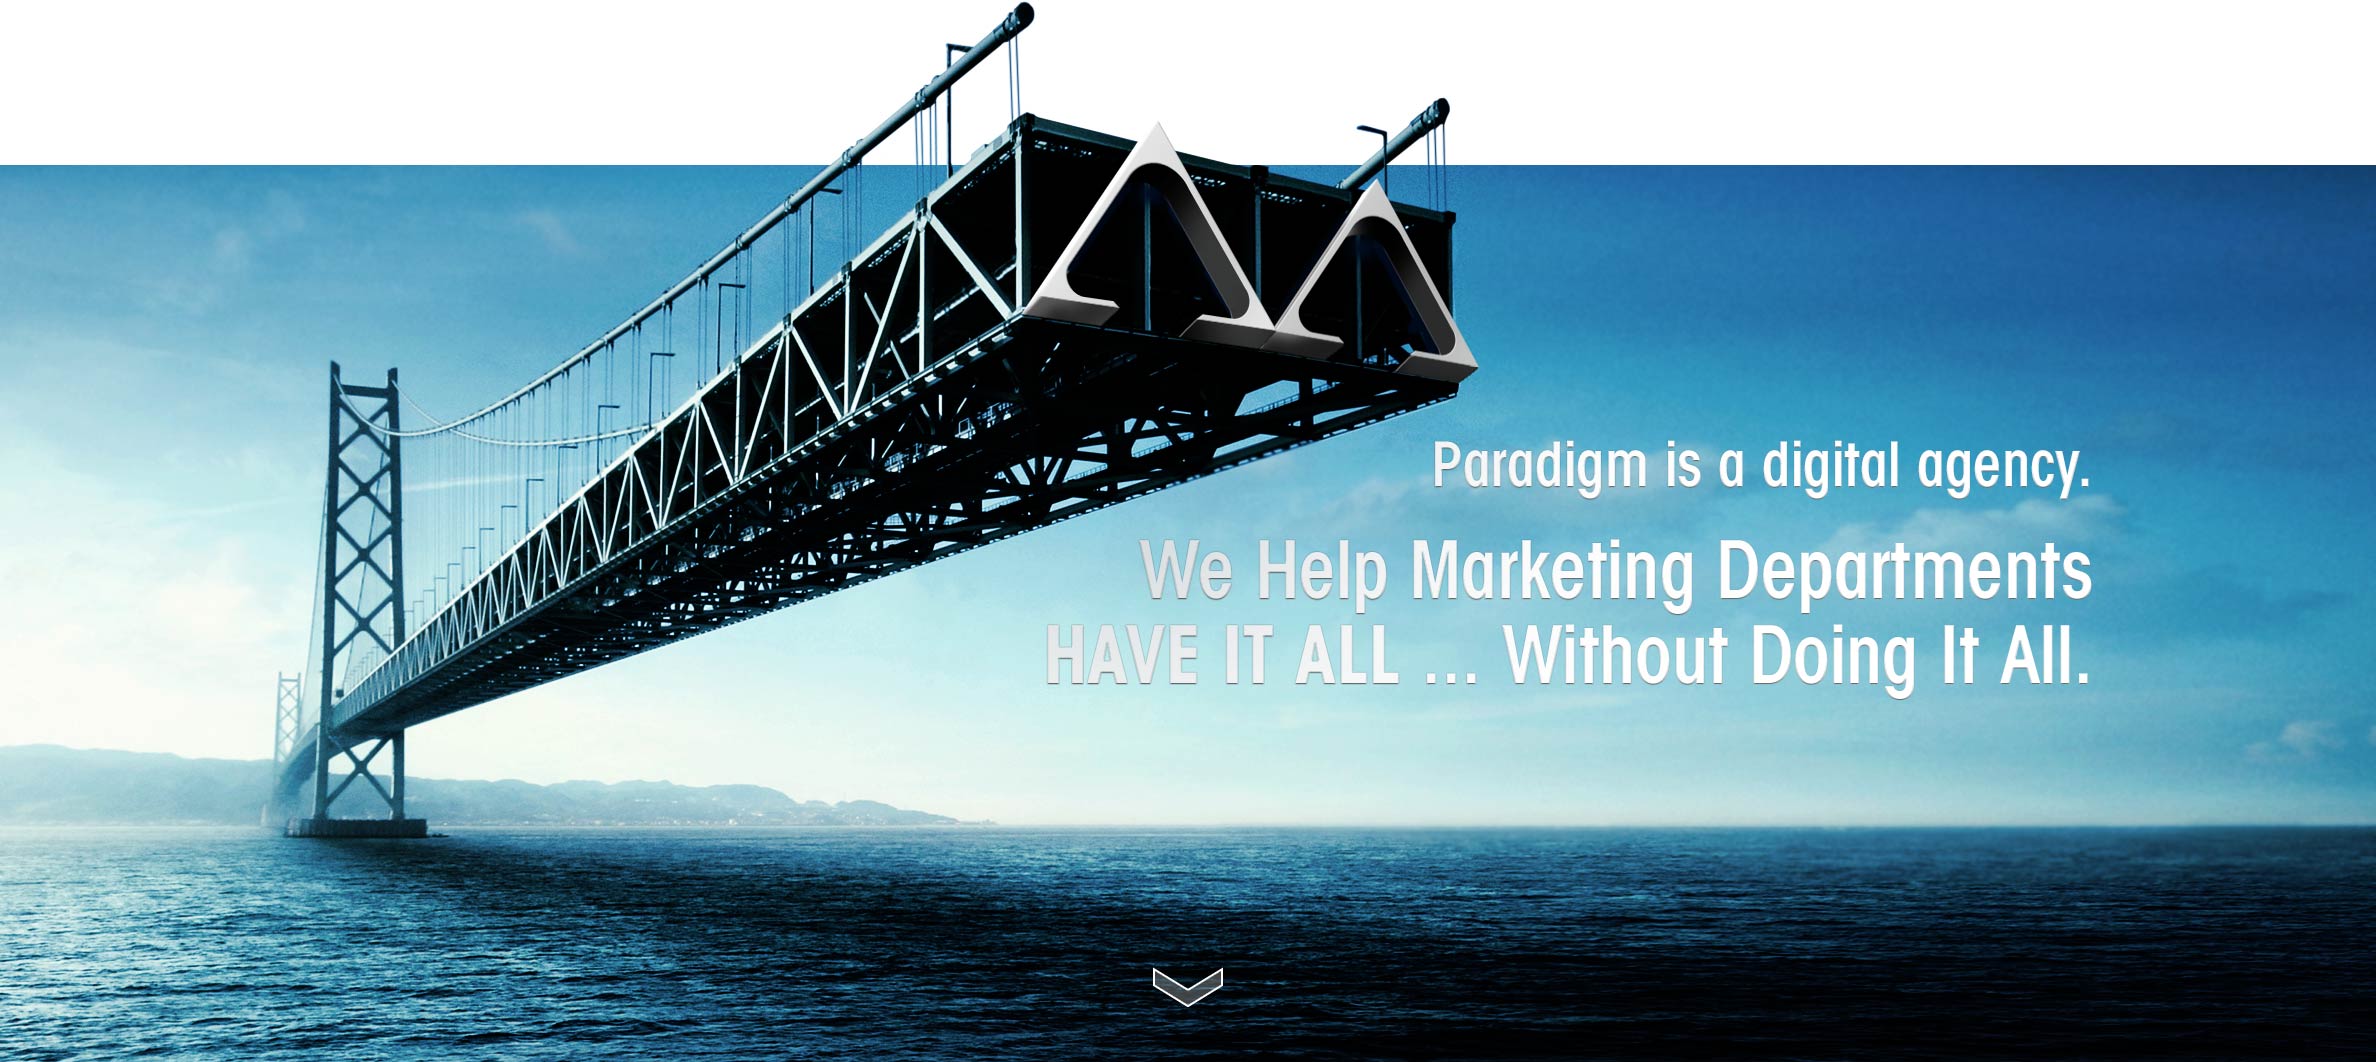 We help marketing departments have it all ... without doing it all.